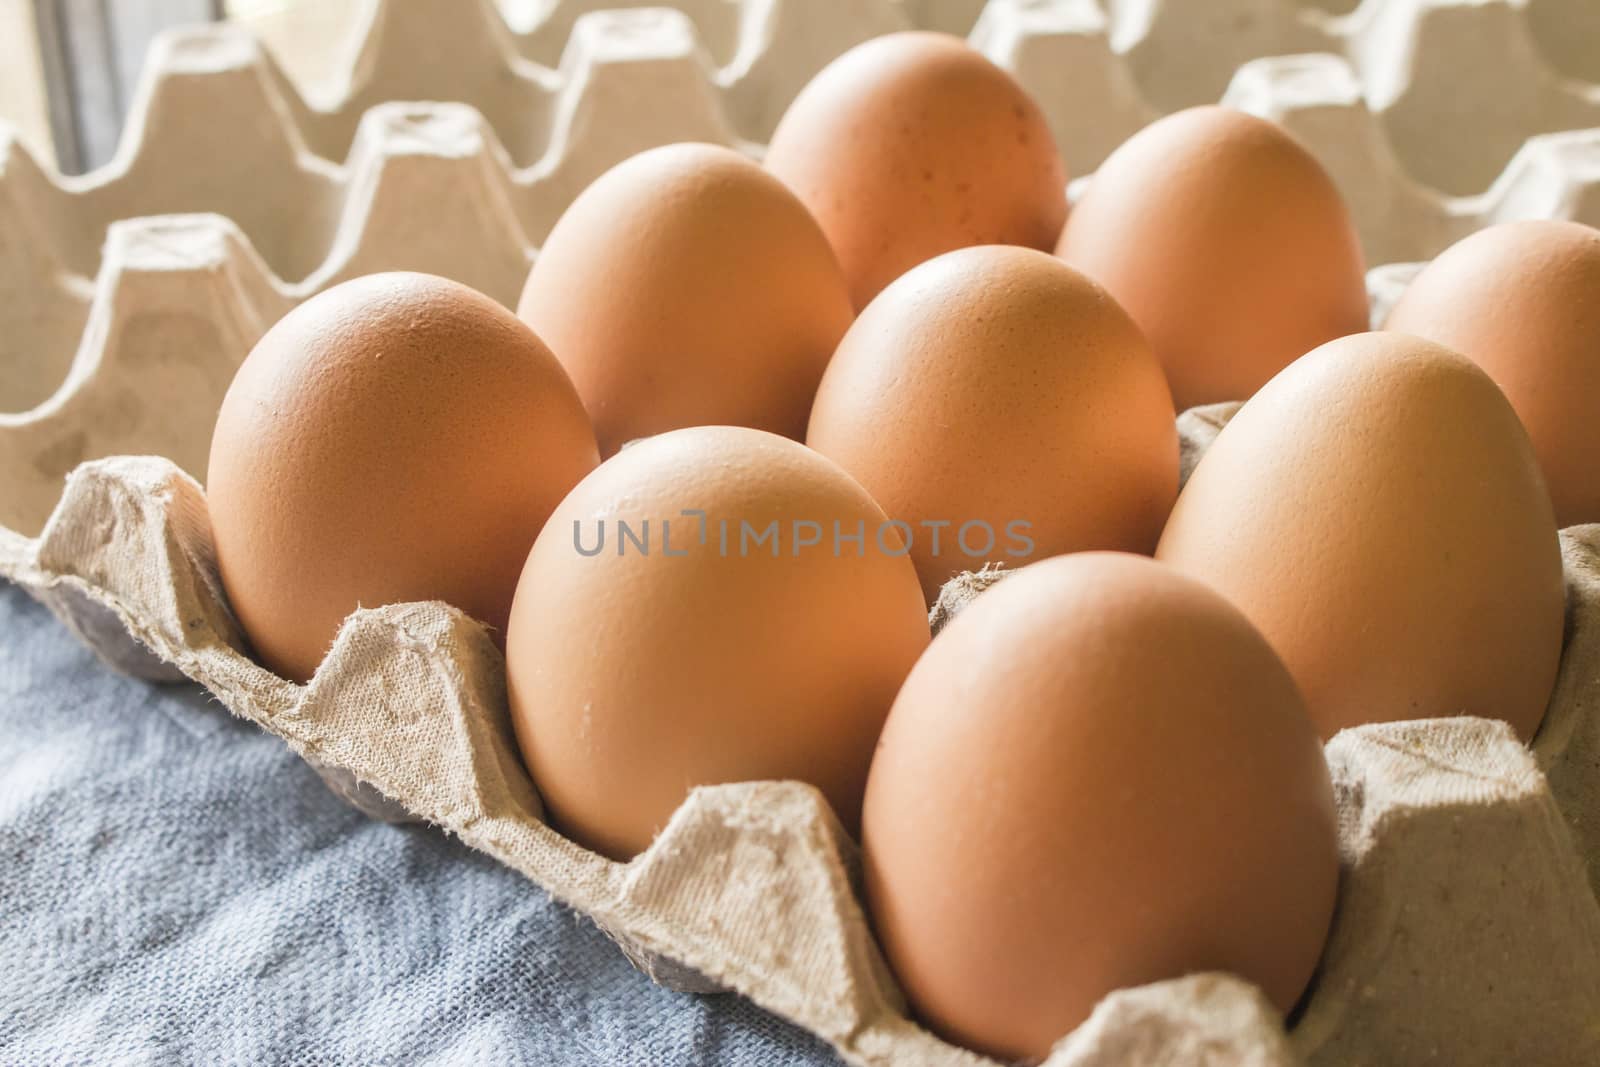  chicken eggs in a tray on paper,selective focus